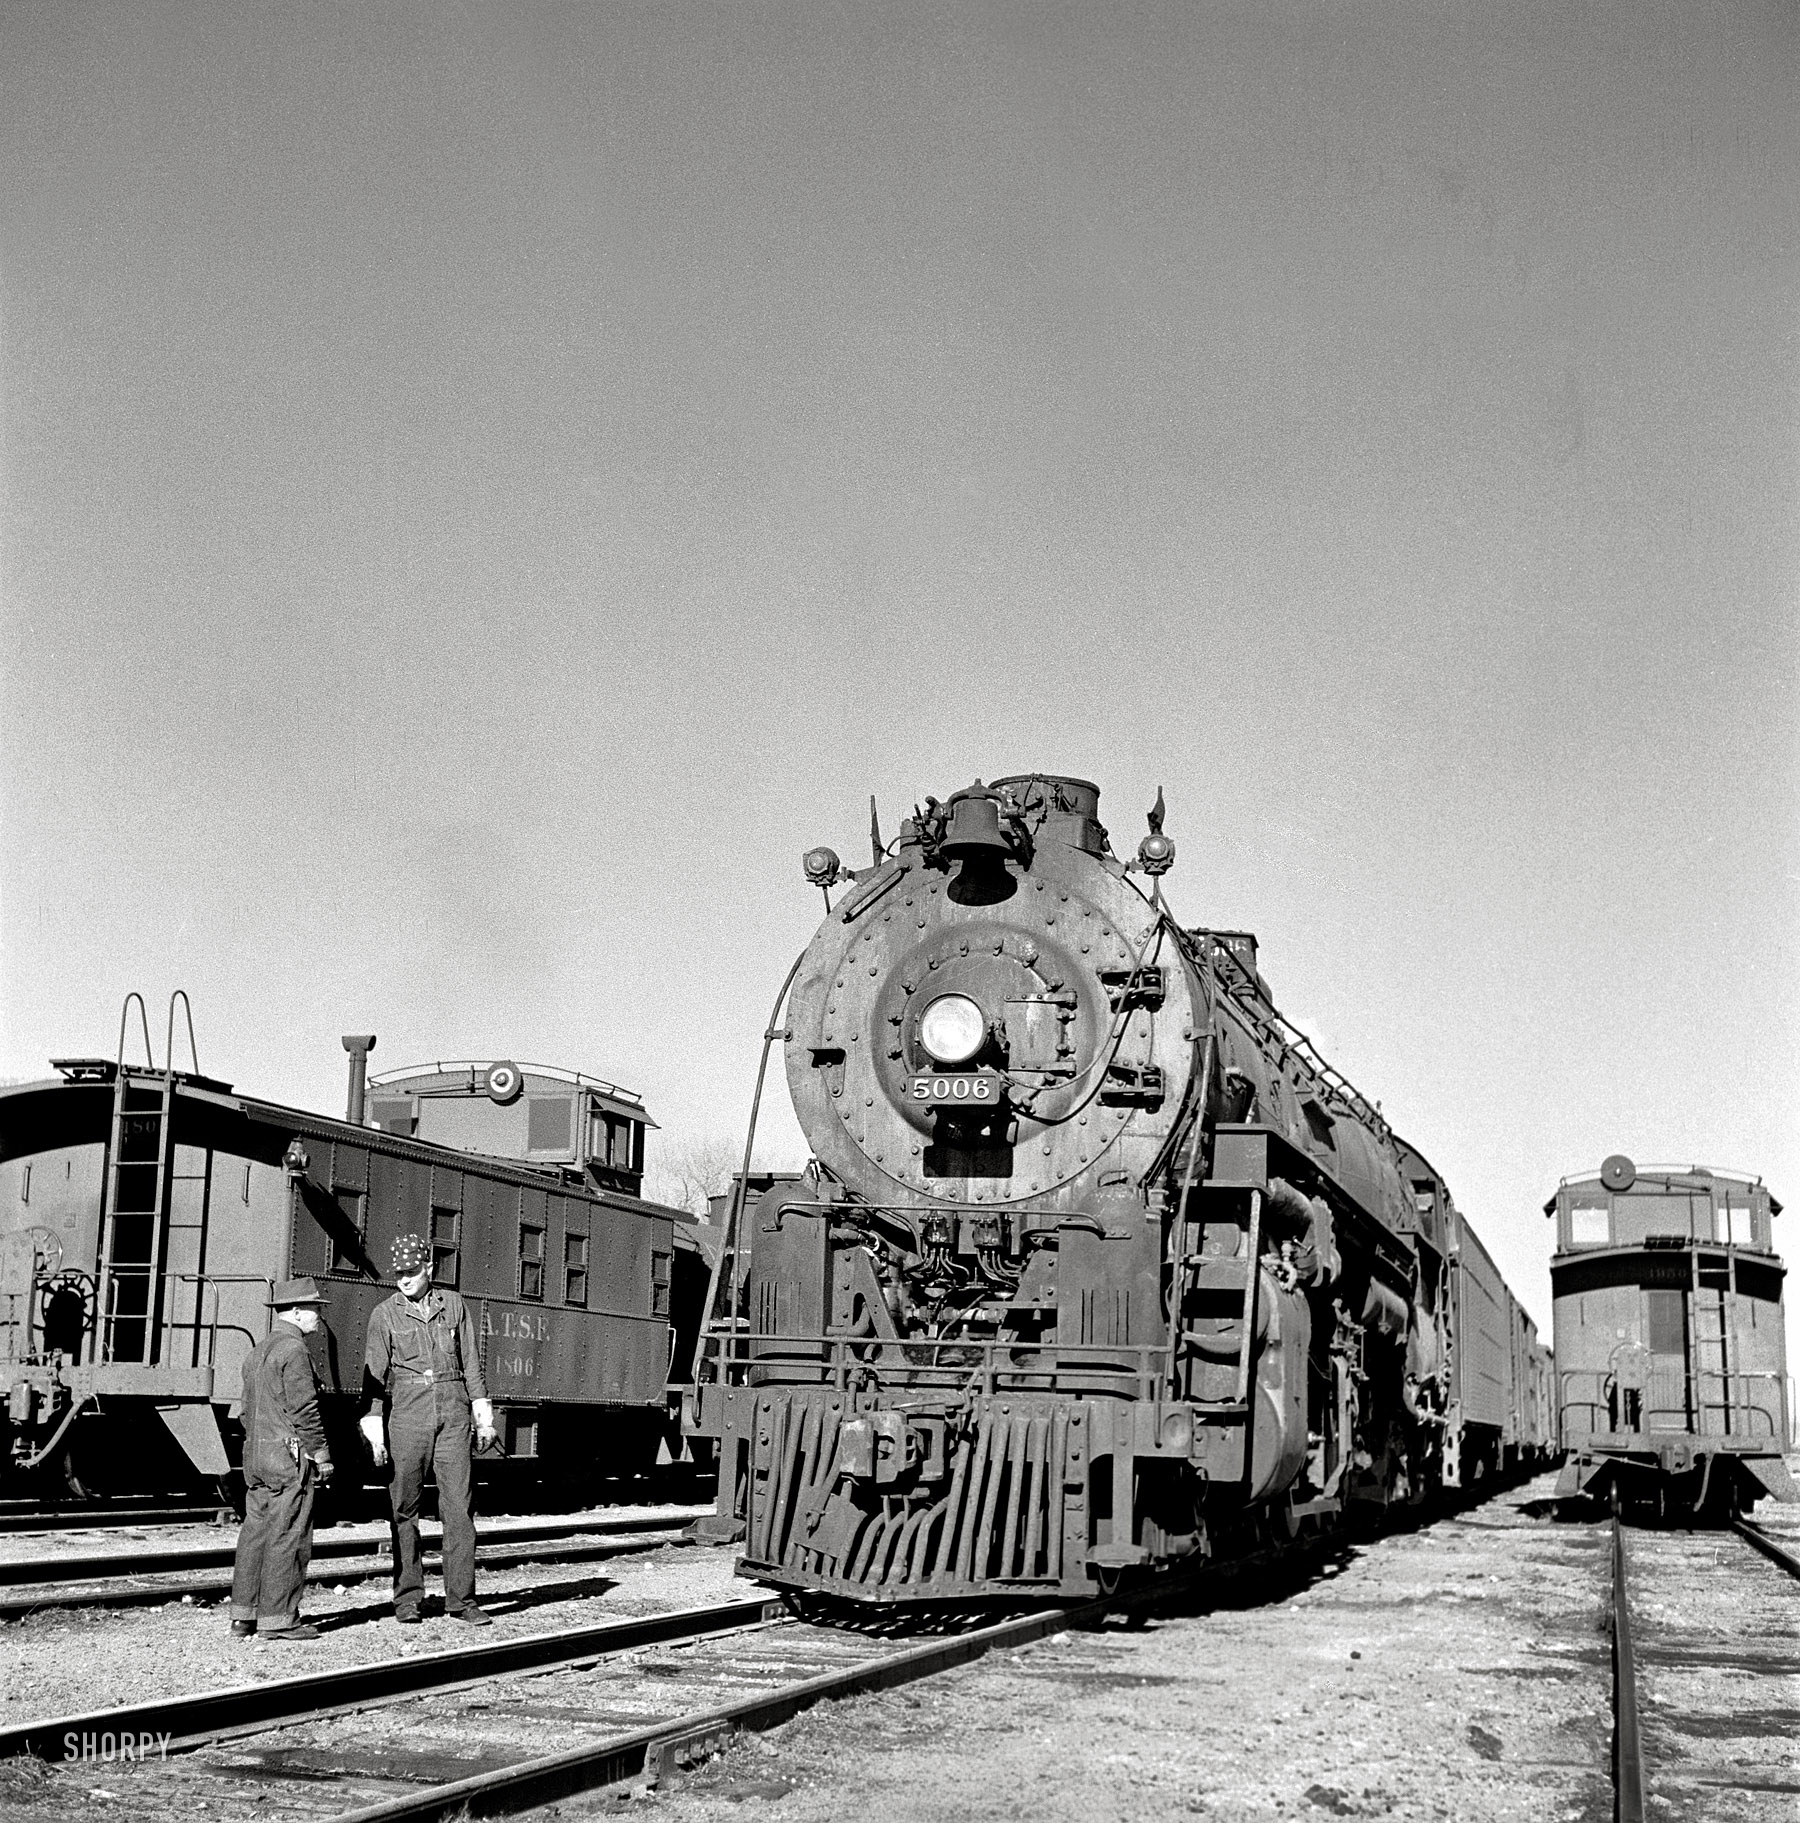 March 1943. Vaughn, New Mexico. "Eastbound train about to leave the Atchison, Topeka and Santa Fe yard on the return trip." Medium-format nitrate negative by Jack Delano for the Office of War Information. View full size.